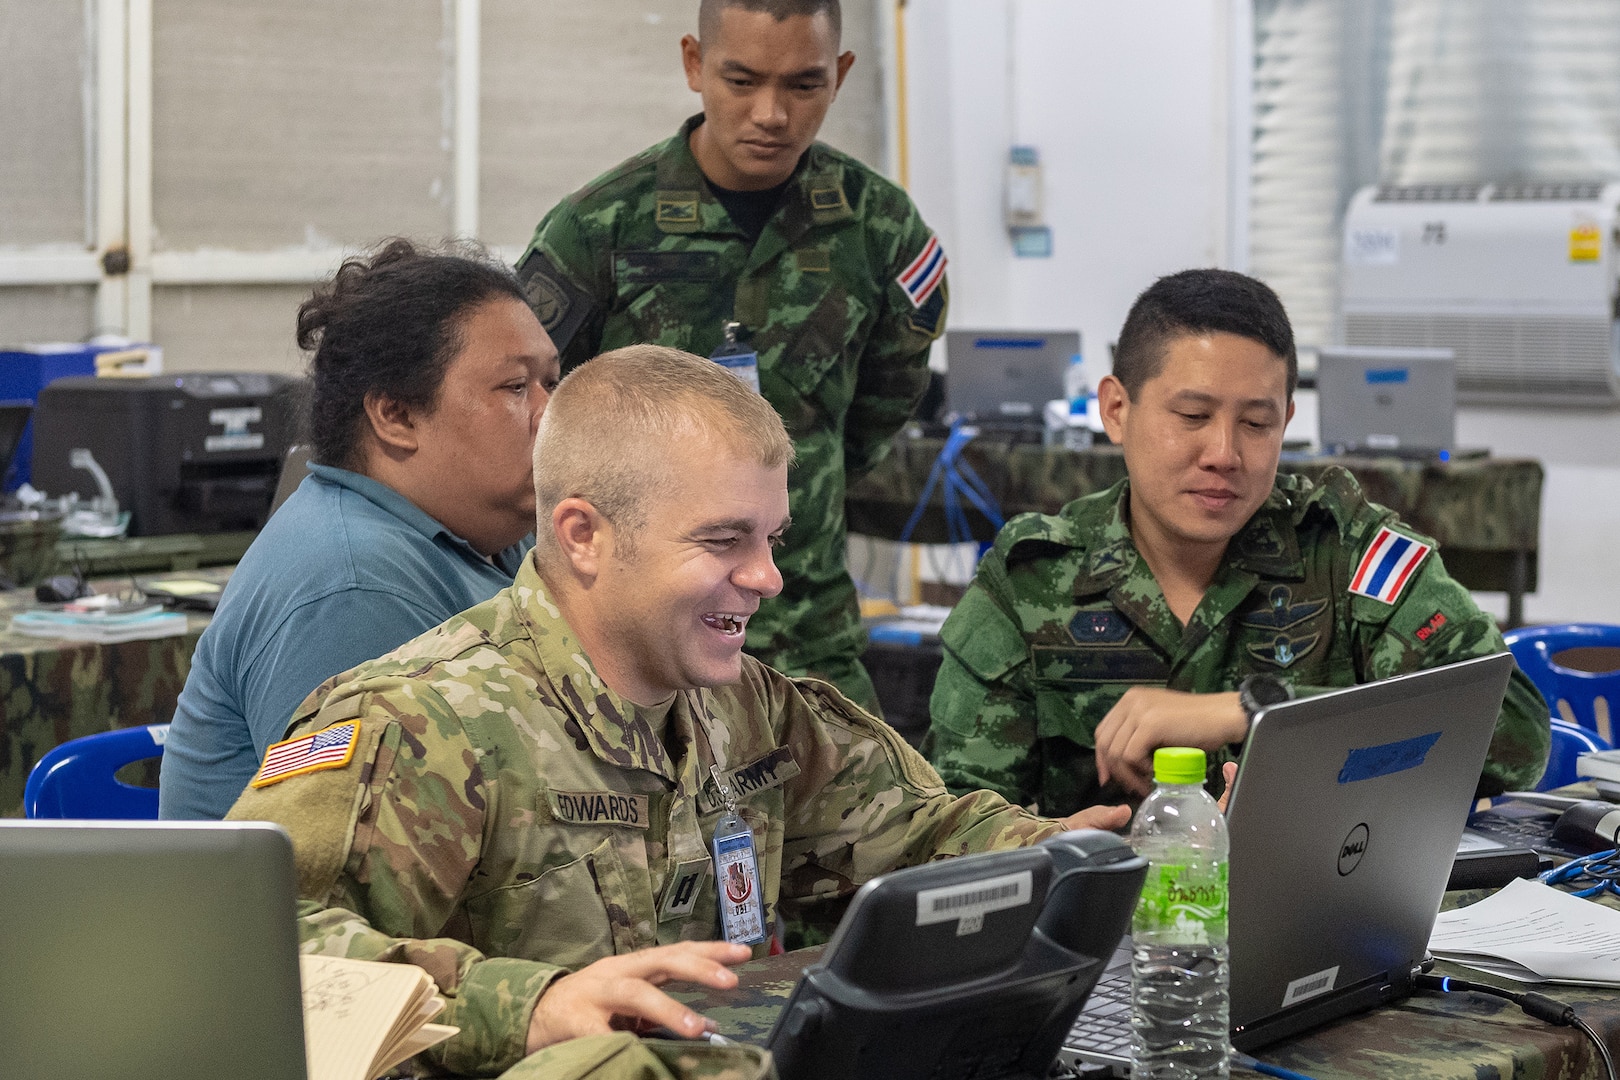 Idaho Army National Guard Capt. A.J. Edwards, 2-116th Combined Arms Battalion plans officer, works to complete mission analysis as part of the military decision-making process with Royal Thai Army Capt. Chawanon Musikadilok, company commander of the 2nd Infantry Battalion’s 1st Riffle Company Aug. 22, 2018, at the Cavalry Center in the Sarburi province. The two are part of the more than 500 U.S. Army, Army National Guard and Royal Thai Army soldiers participating in Hanuman Guardian 2018, a bilateral exercise that strengthens capability and builds interoperability between U.S. and Royal Thai Army forces.